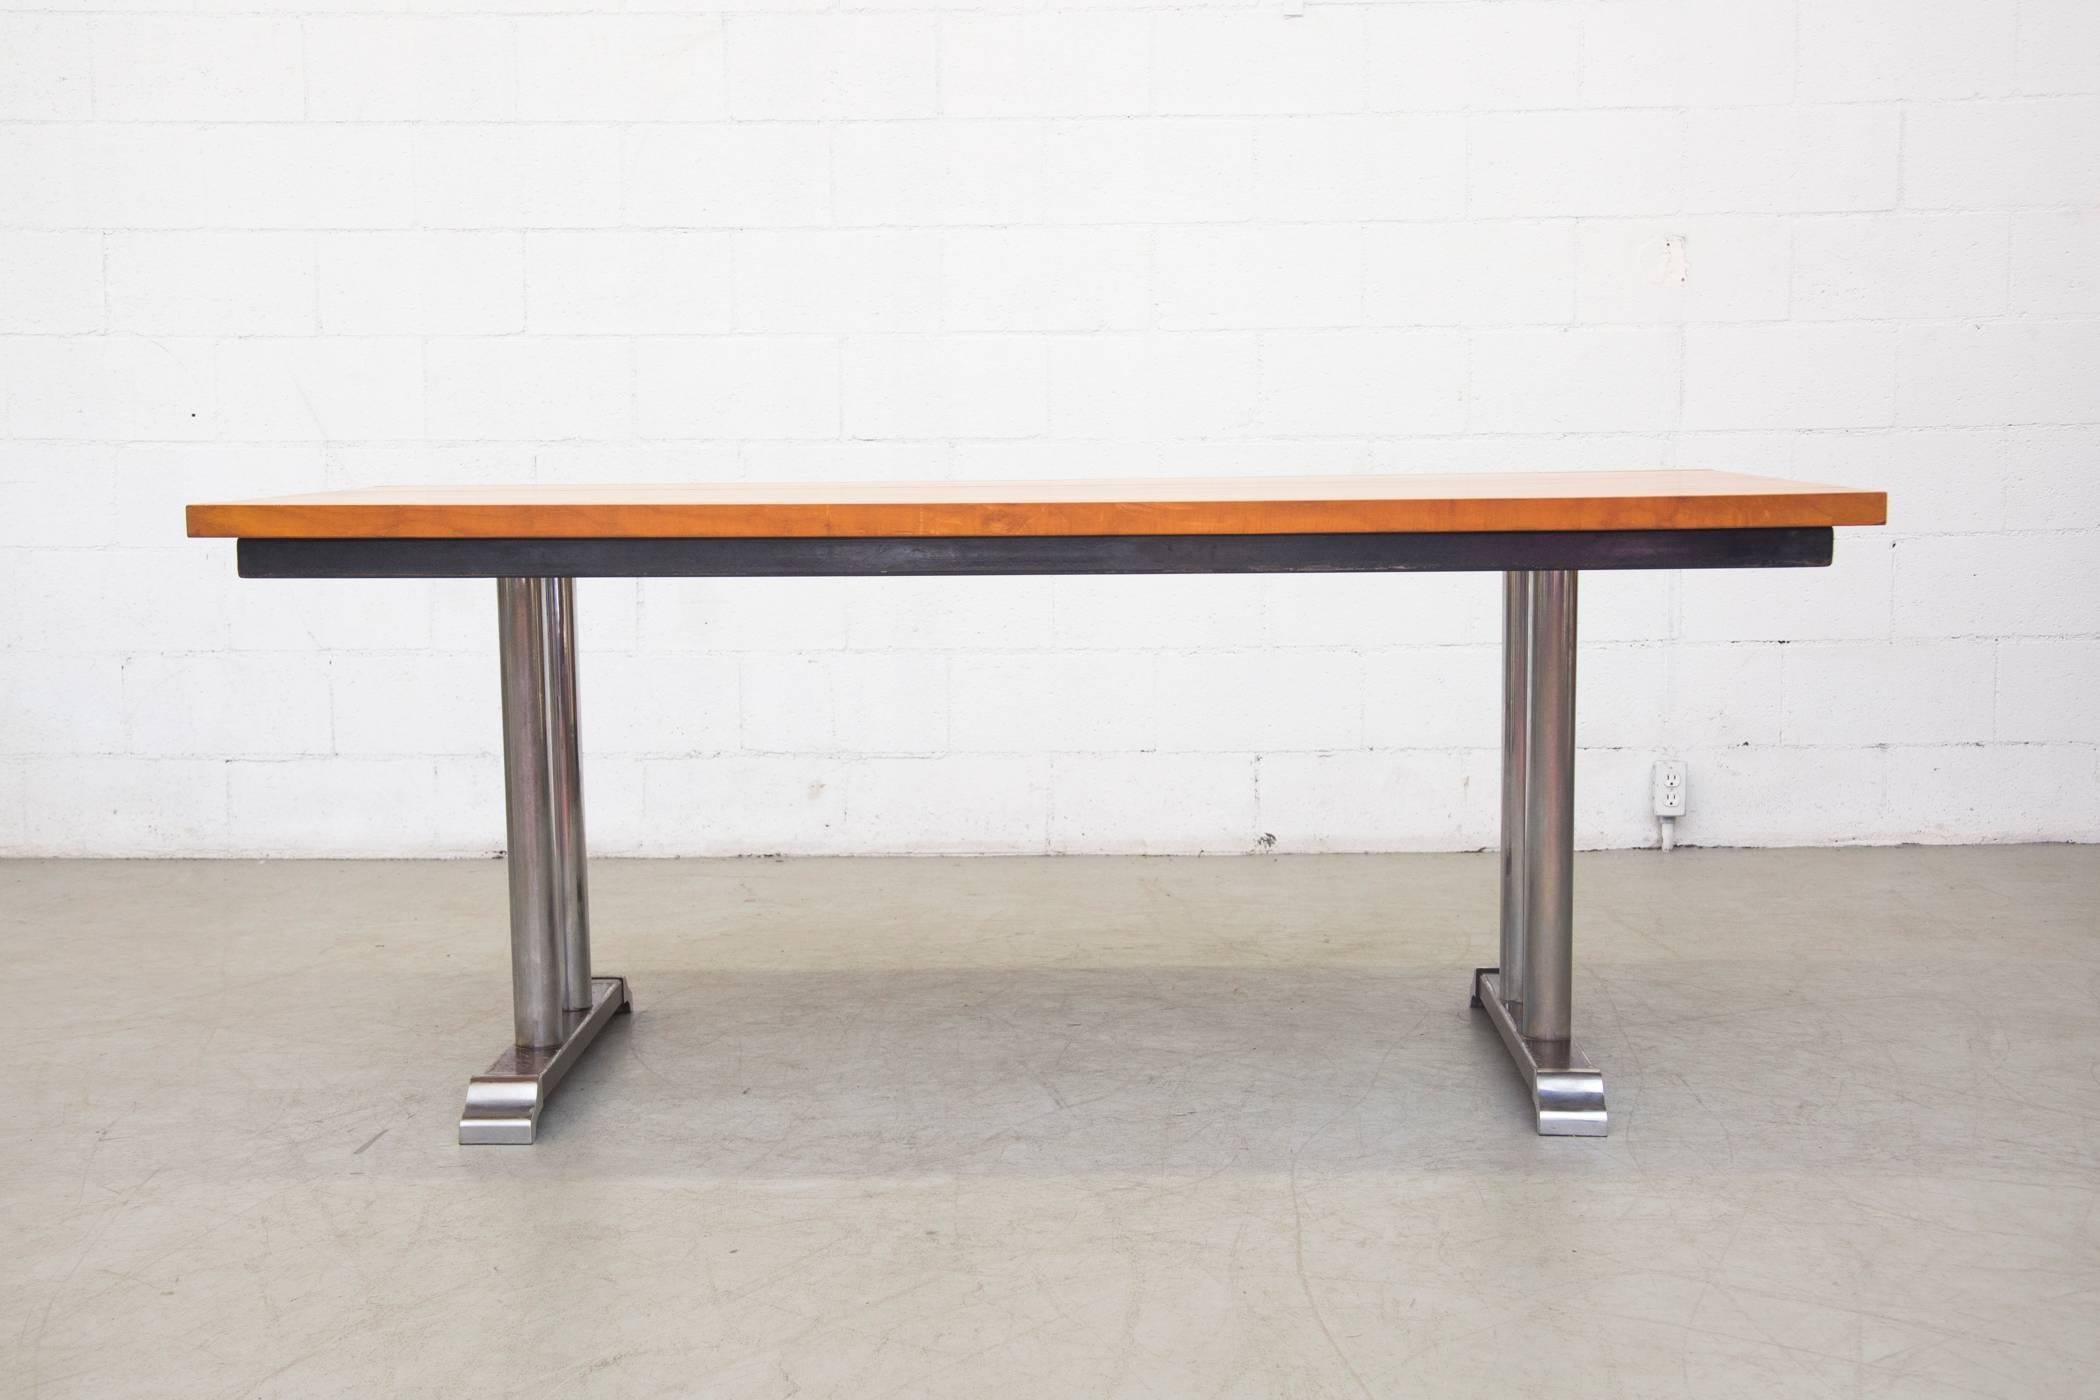 Incredibly rare solid wood topped Industrial conference table with enameled steel frame and chromed base. Visible enamel loss on the base and visible scratching to chrome. Otherwise, good original condition. Heavy beast!

.